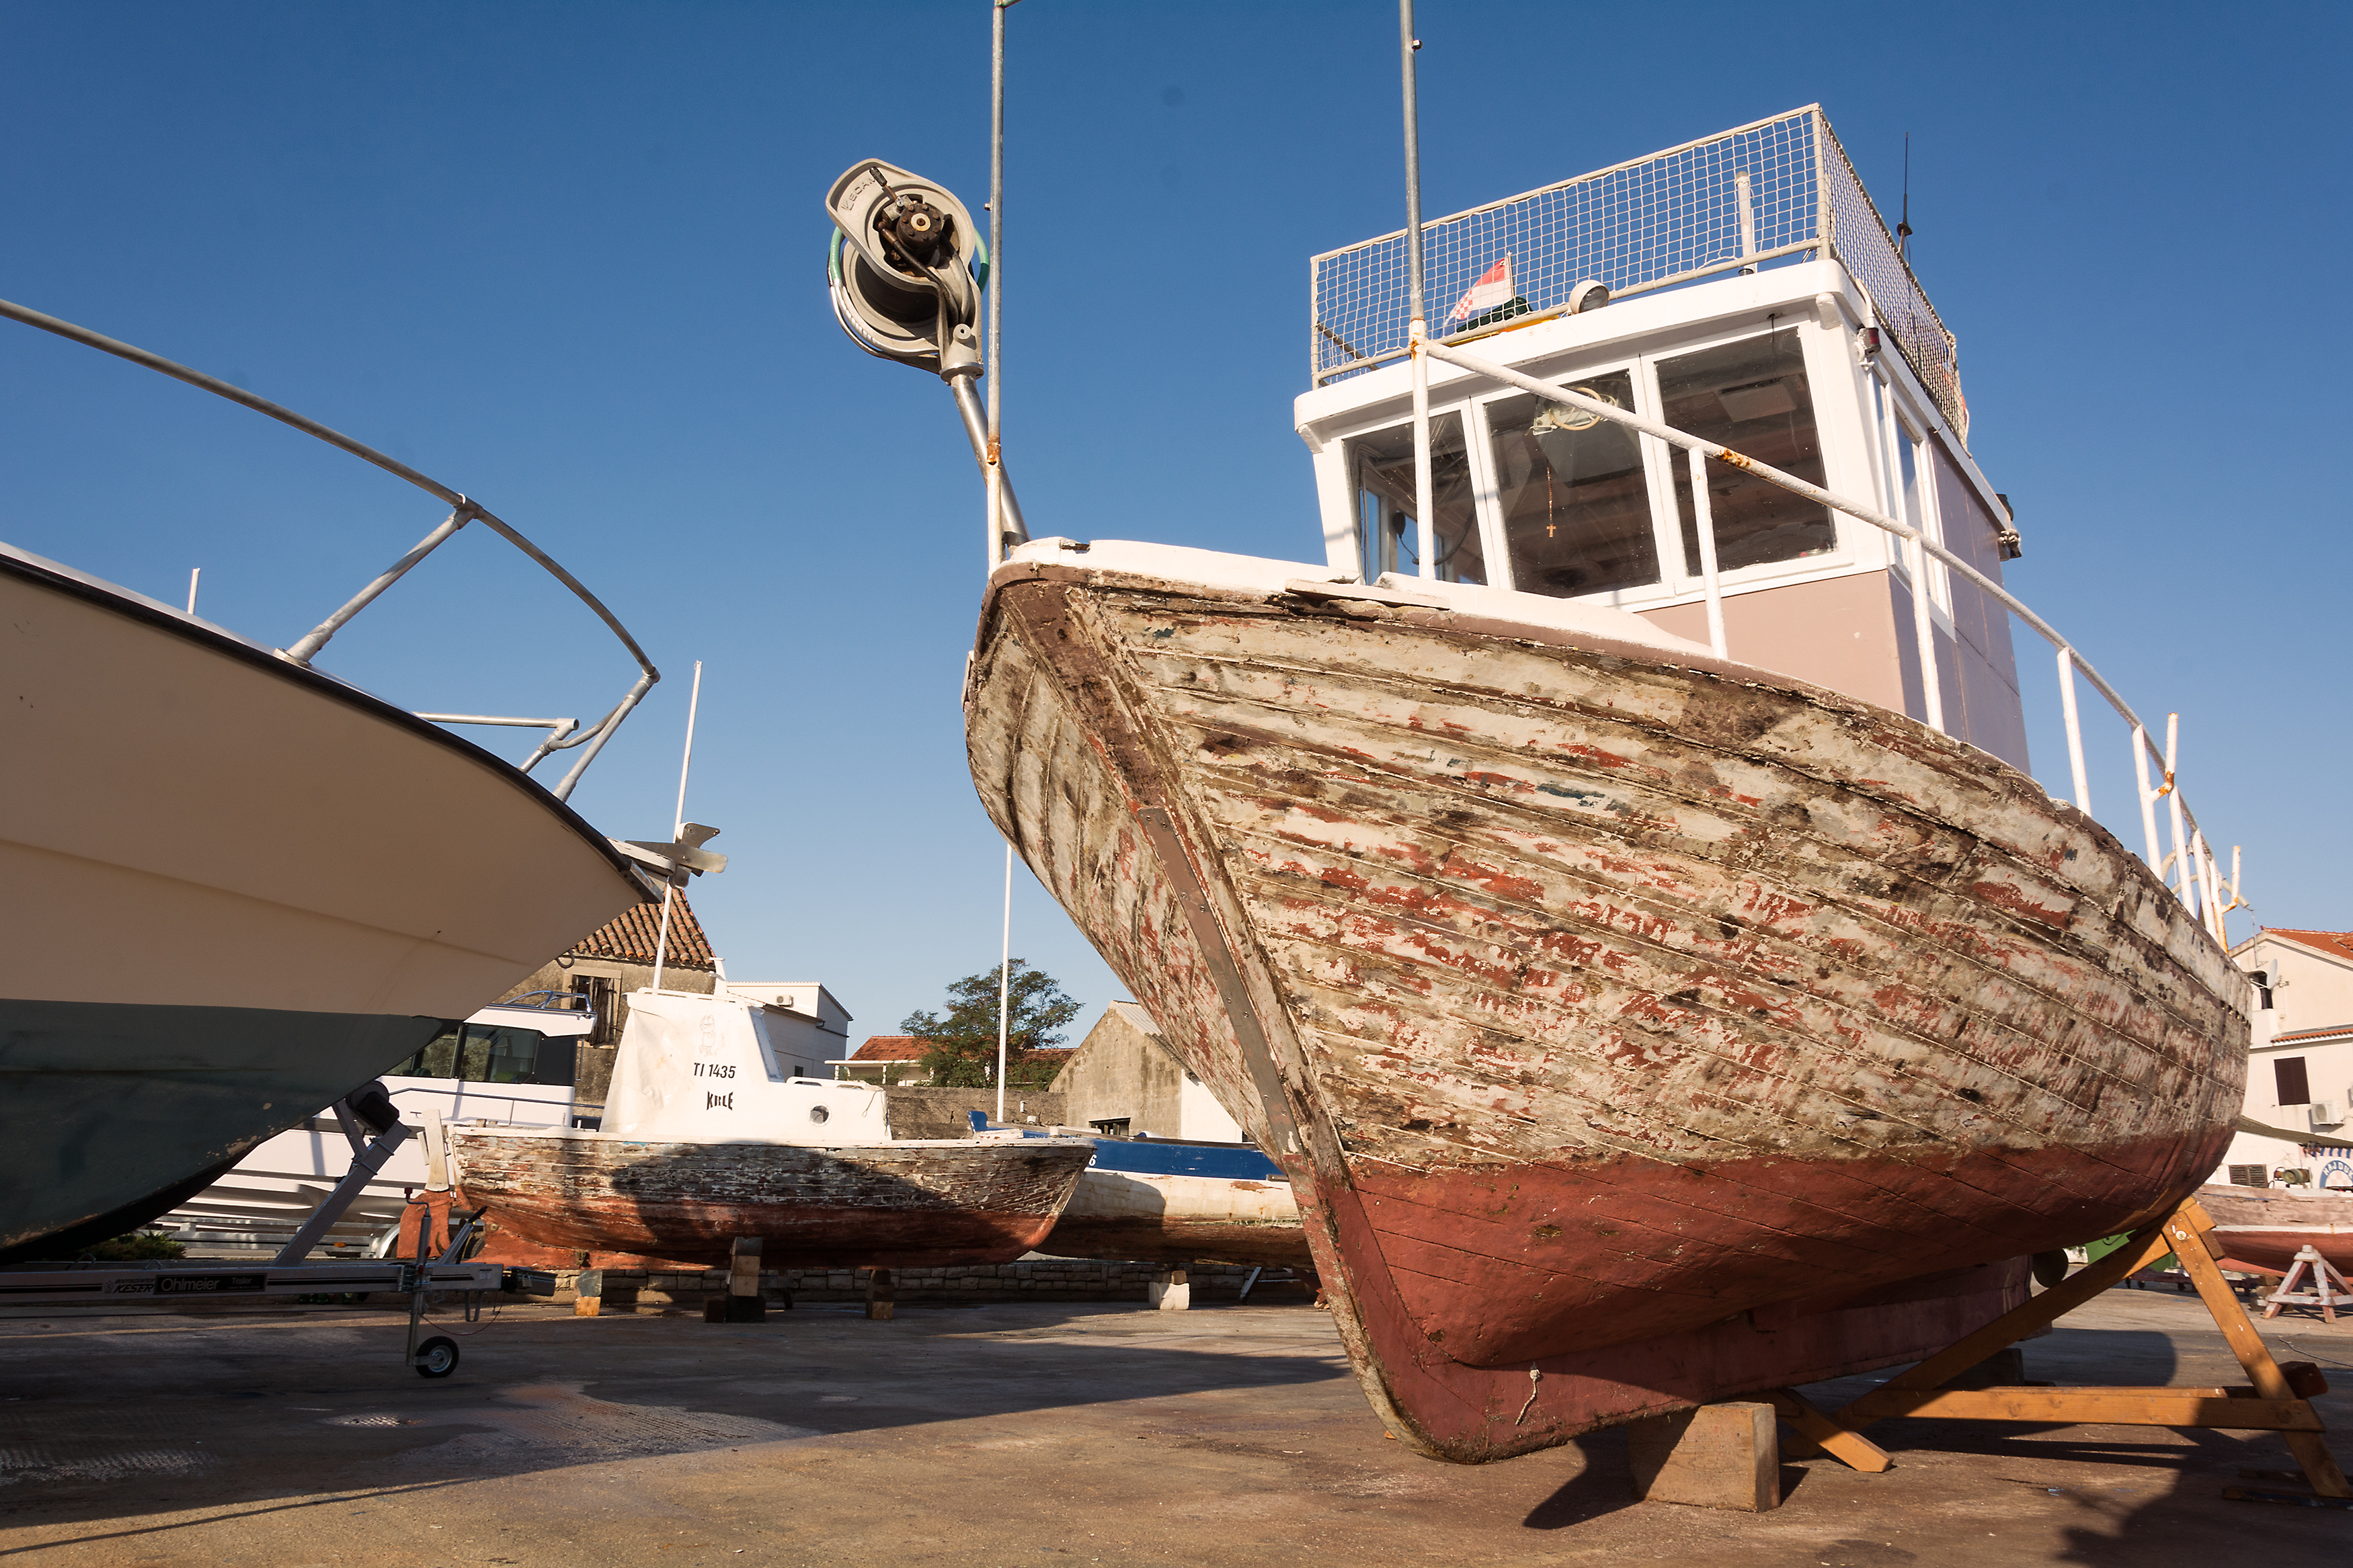 Free Image: An old fishing boat in dry dock | Libreshot Public ...